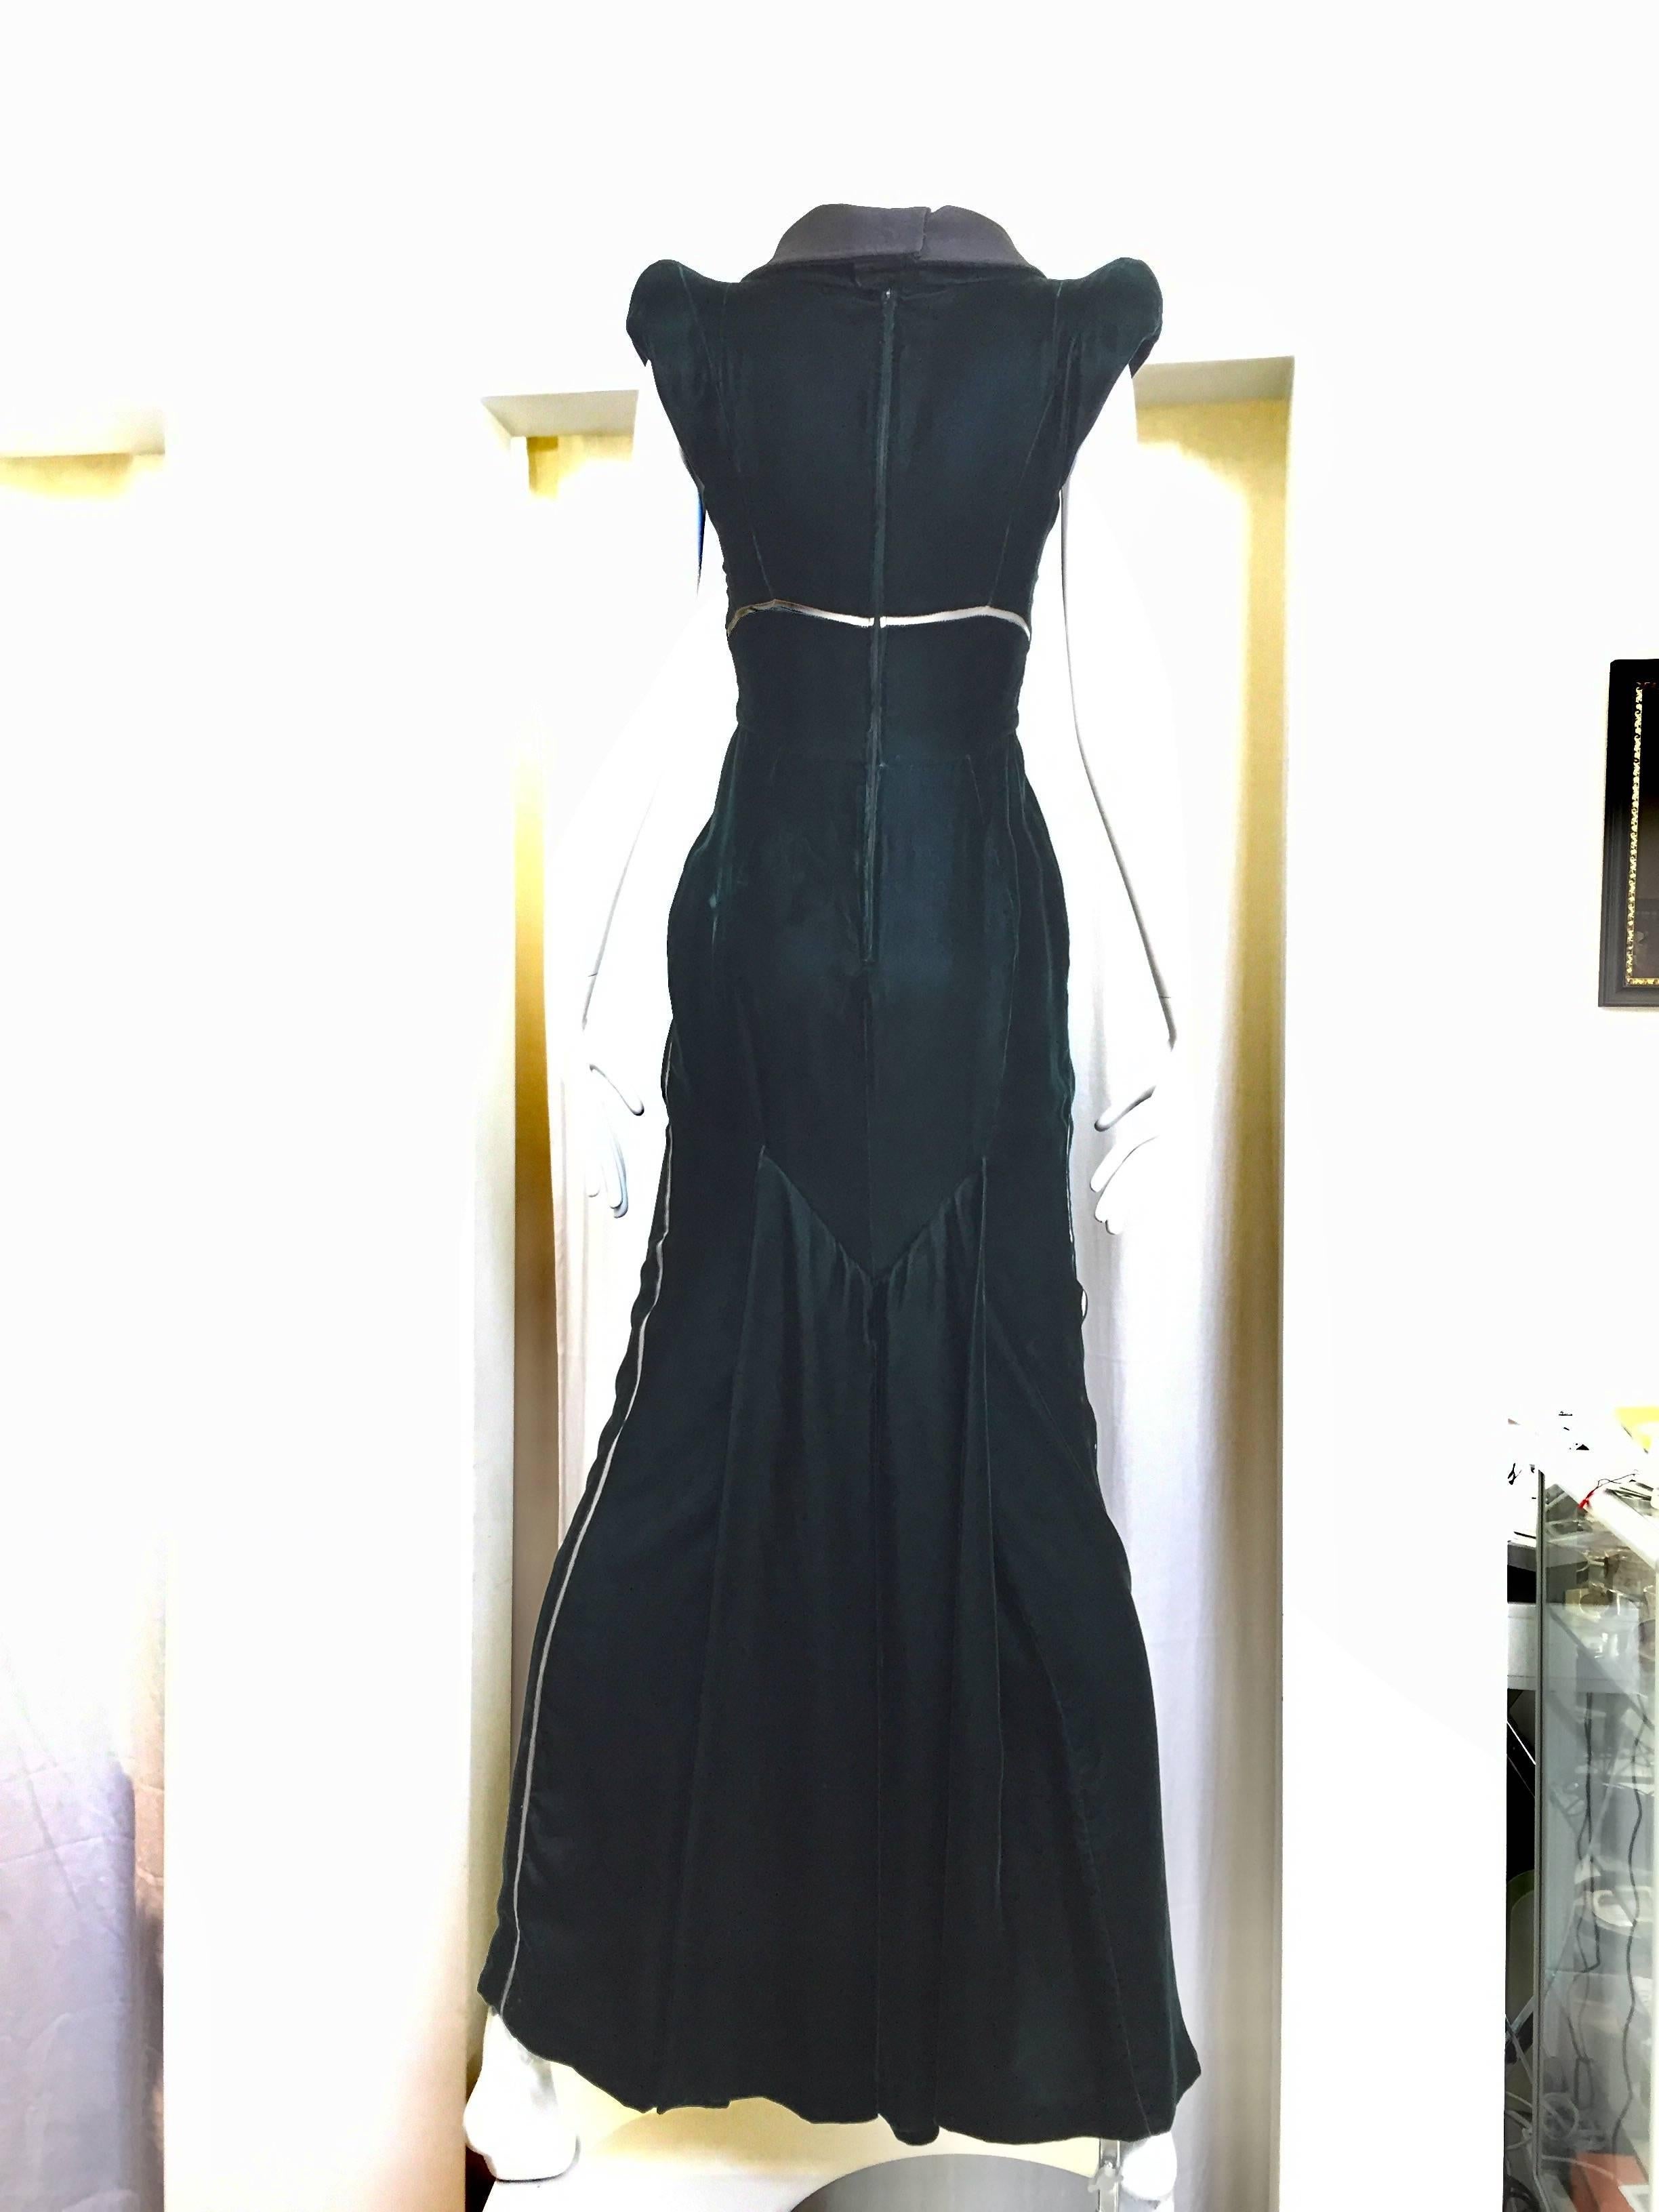 STUNNING  Gianfranco Ferre dark forest green velvet Long evening gown with unique black matte silk rolled collar neckline. Small light shoulder pads, back zipper  and banded cream knit Insets down each Side. This Magnificent gown is also Fully